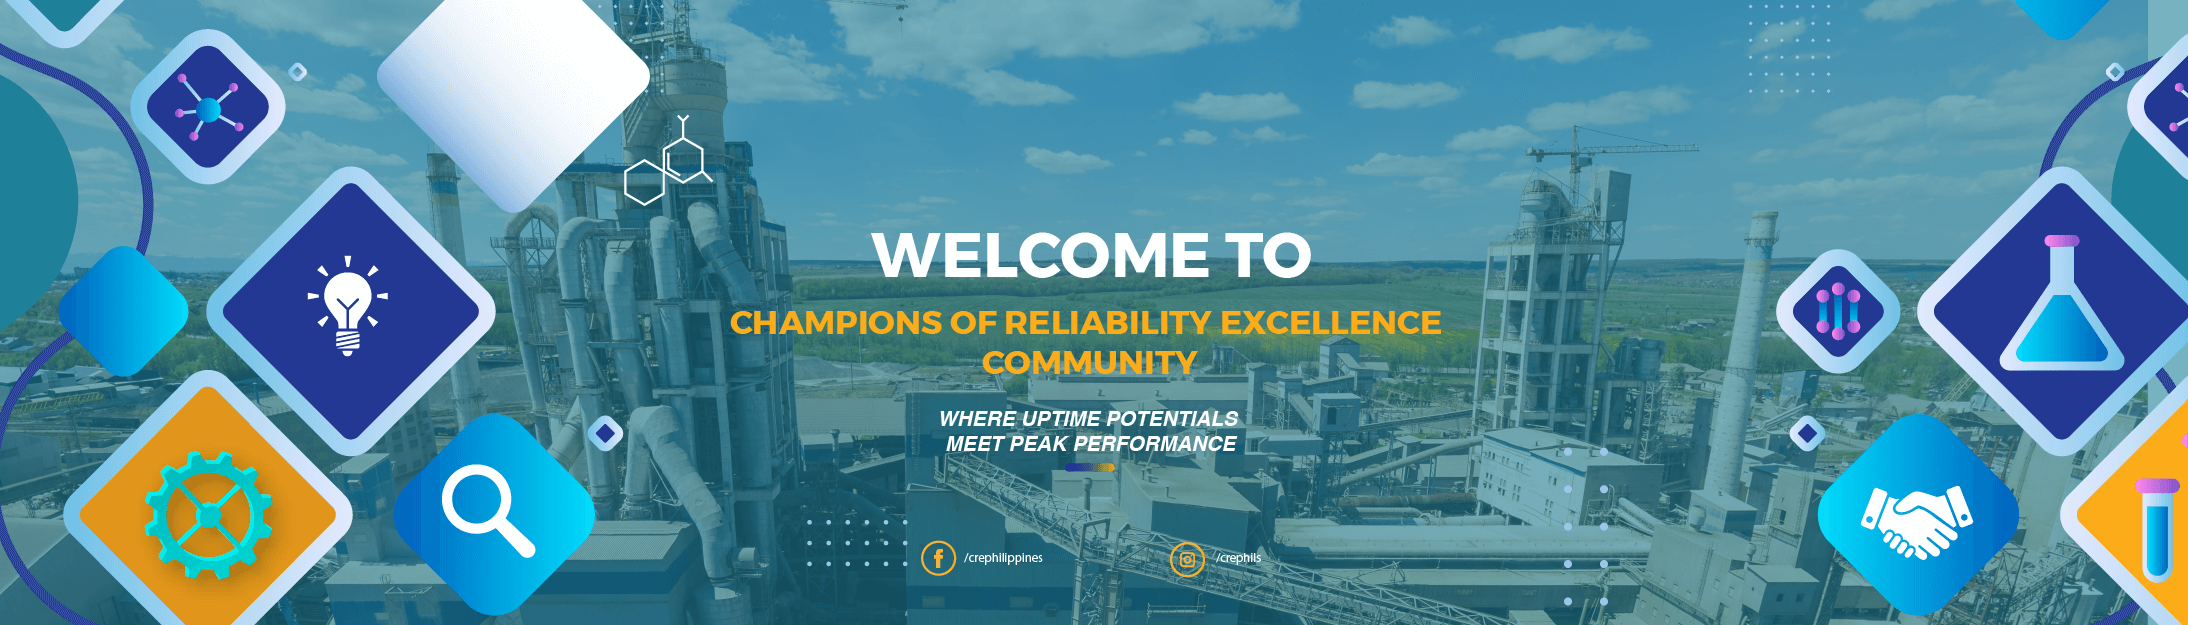 champions-of-reliability-excellence-wb